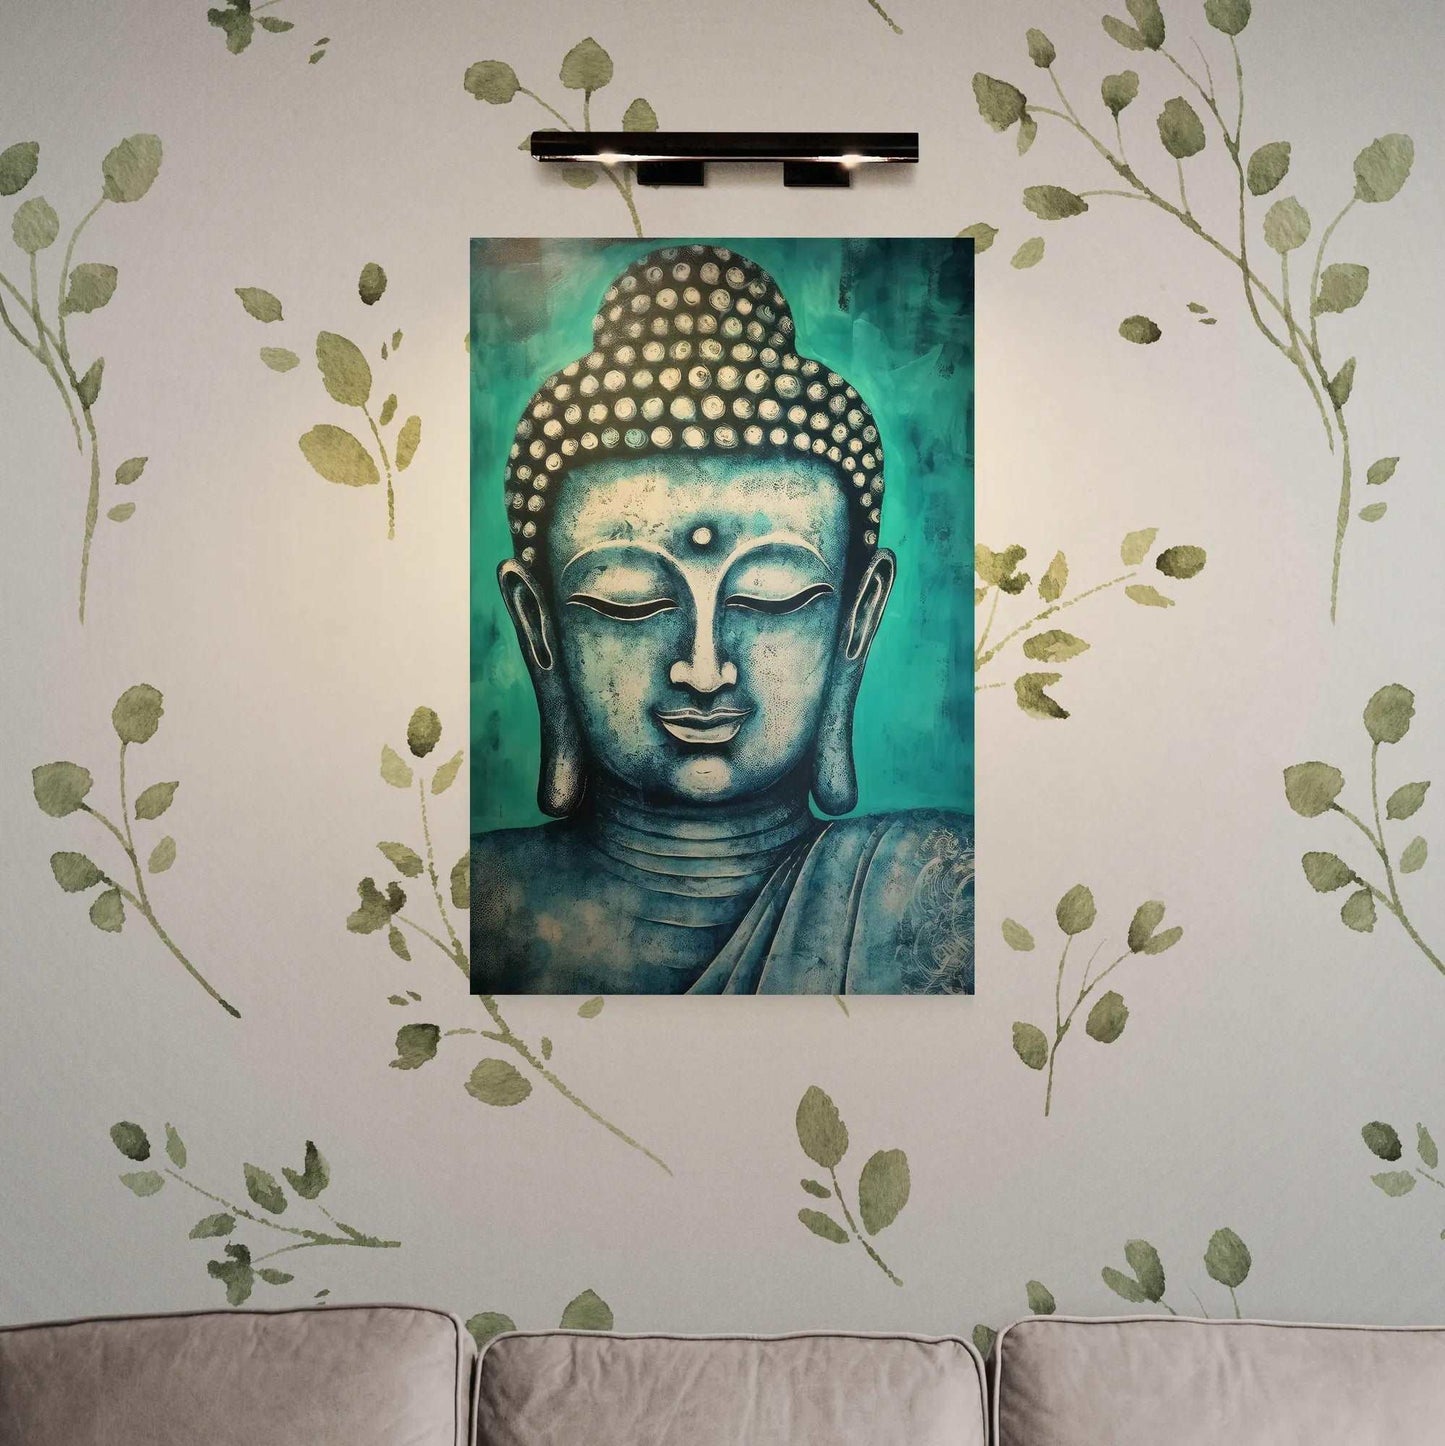 Cozy living space with leaf-patterned wallpaper and a comfortable gray sofa, adorned with a blue and gold Buddha head painting and elegant wall lighting